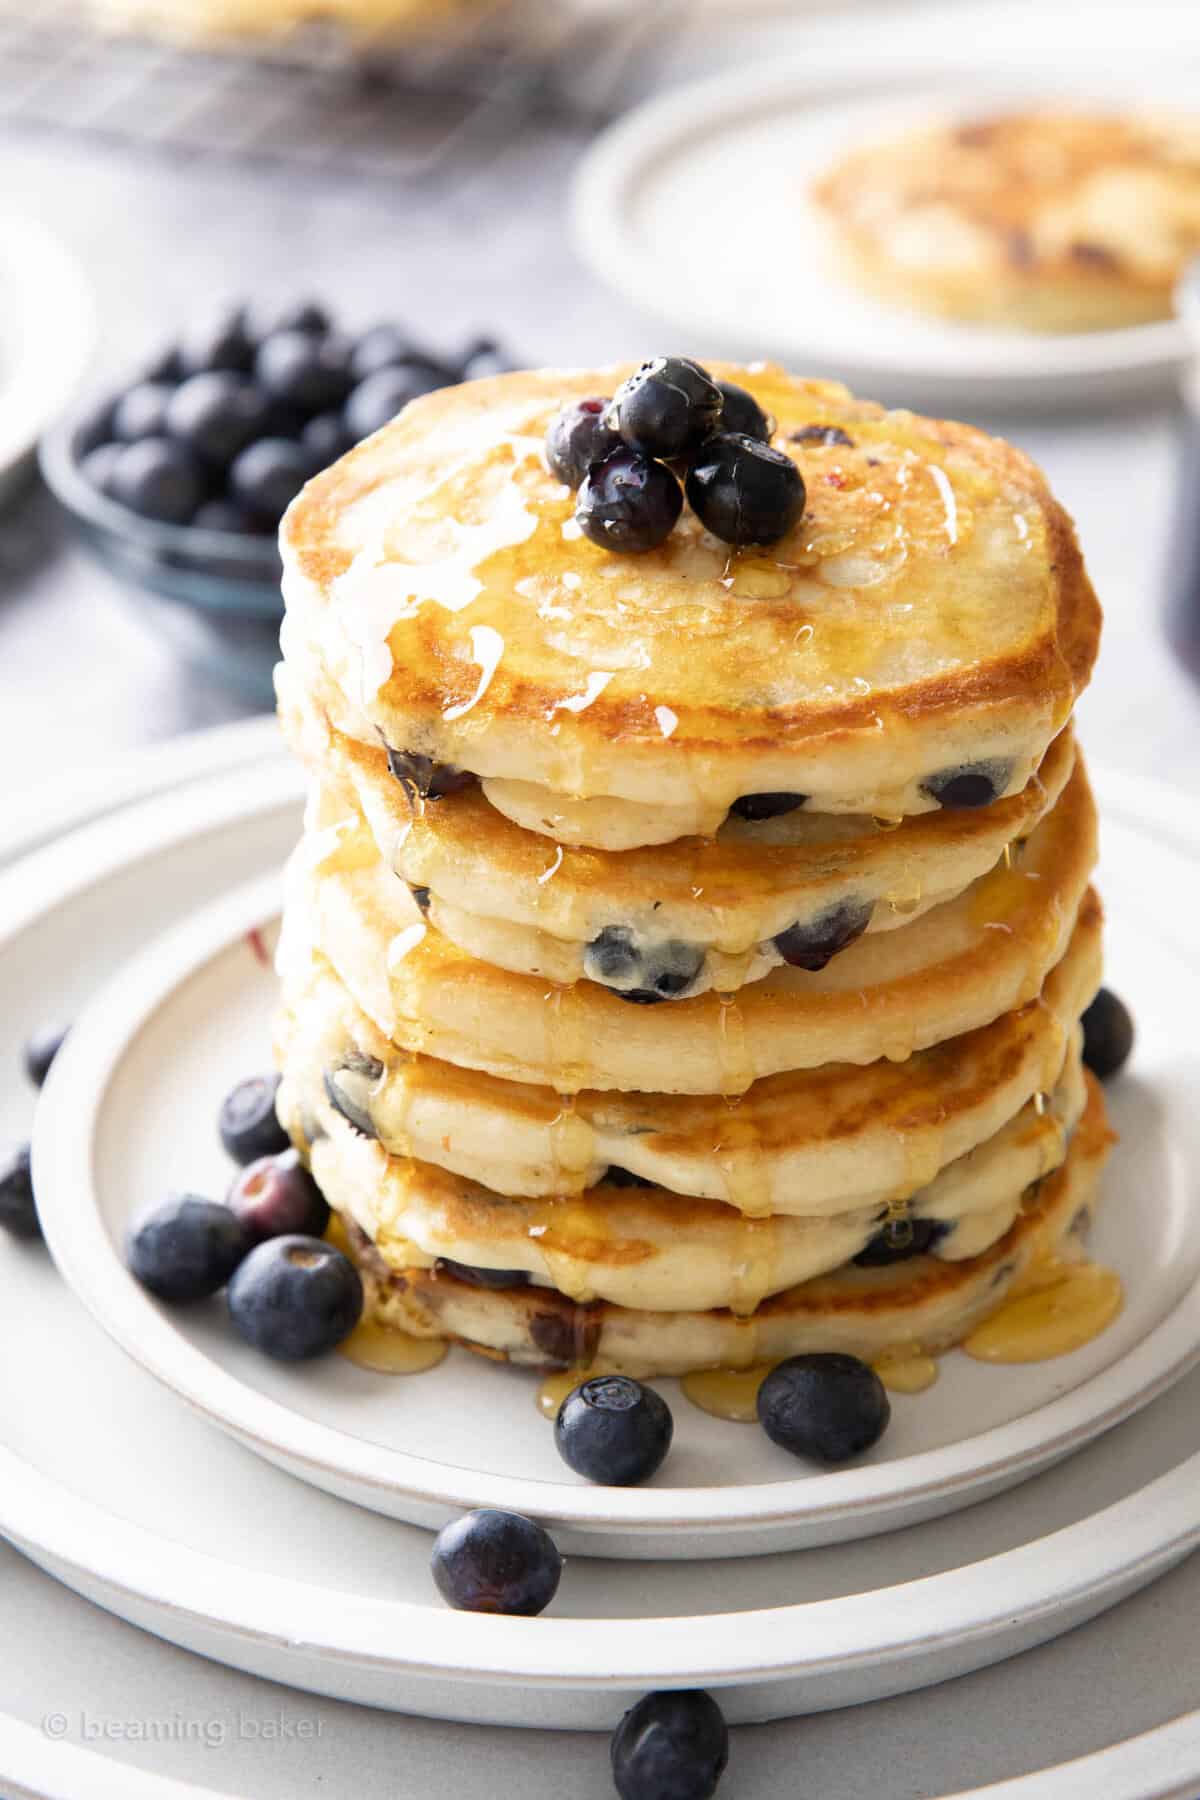 Tall stack of vegan blueberry pancakes drenched in syrup